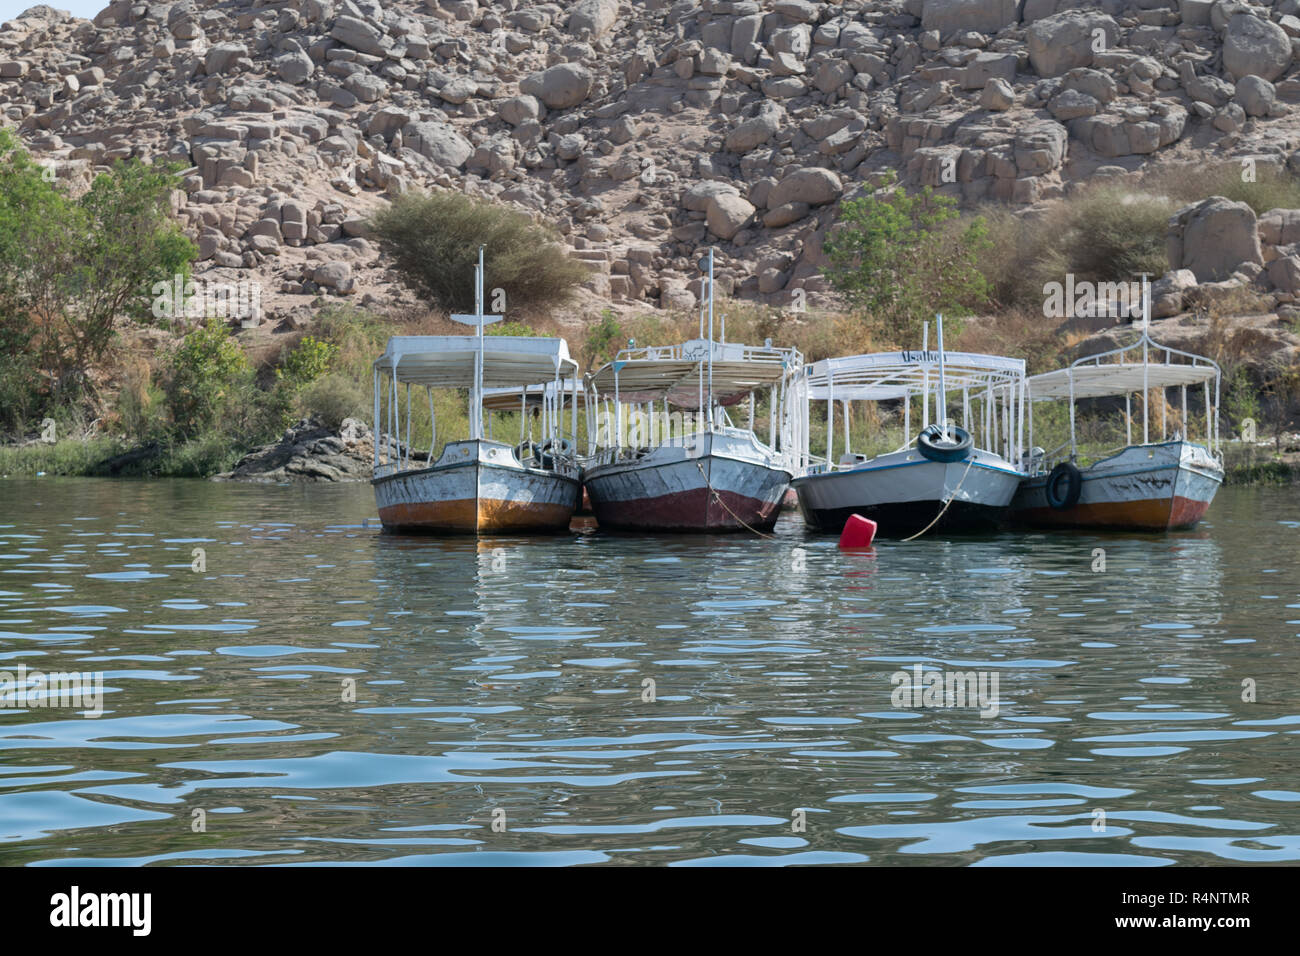 Beautiful scene for Nile river and boats from Luxor and Aswan tour in Egypt Stock Photo